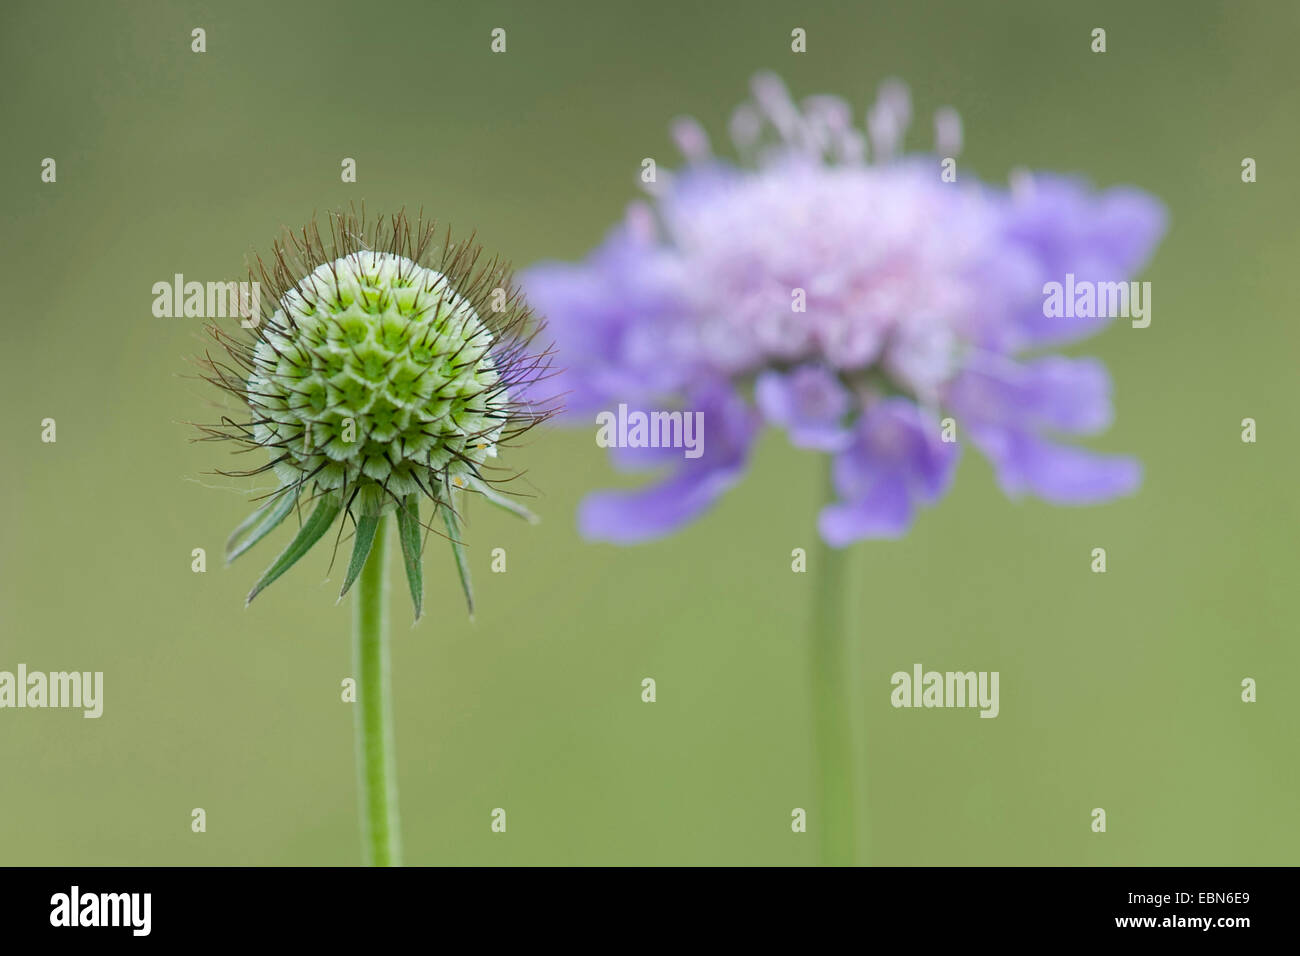 Small scabious, Lesser scabious (Scabiosa columbaria), withered and flowering, Germany Stock Photo